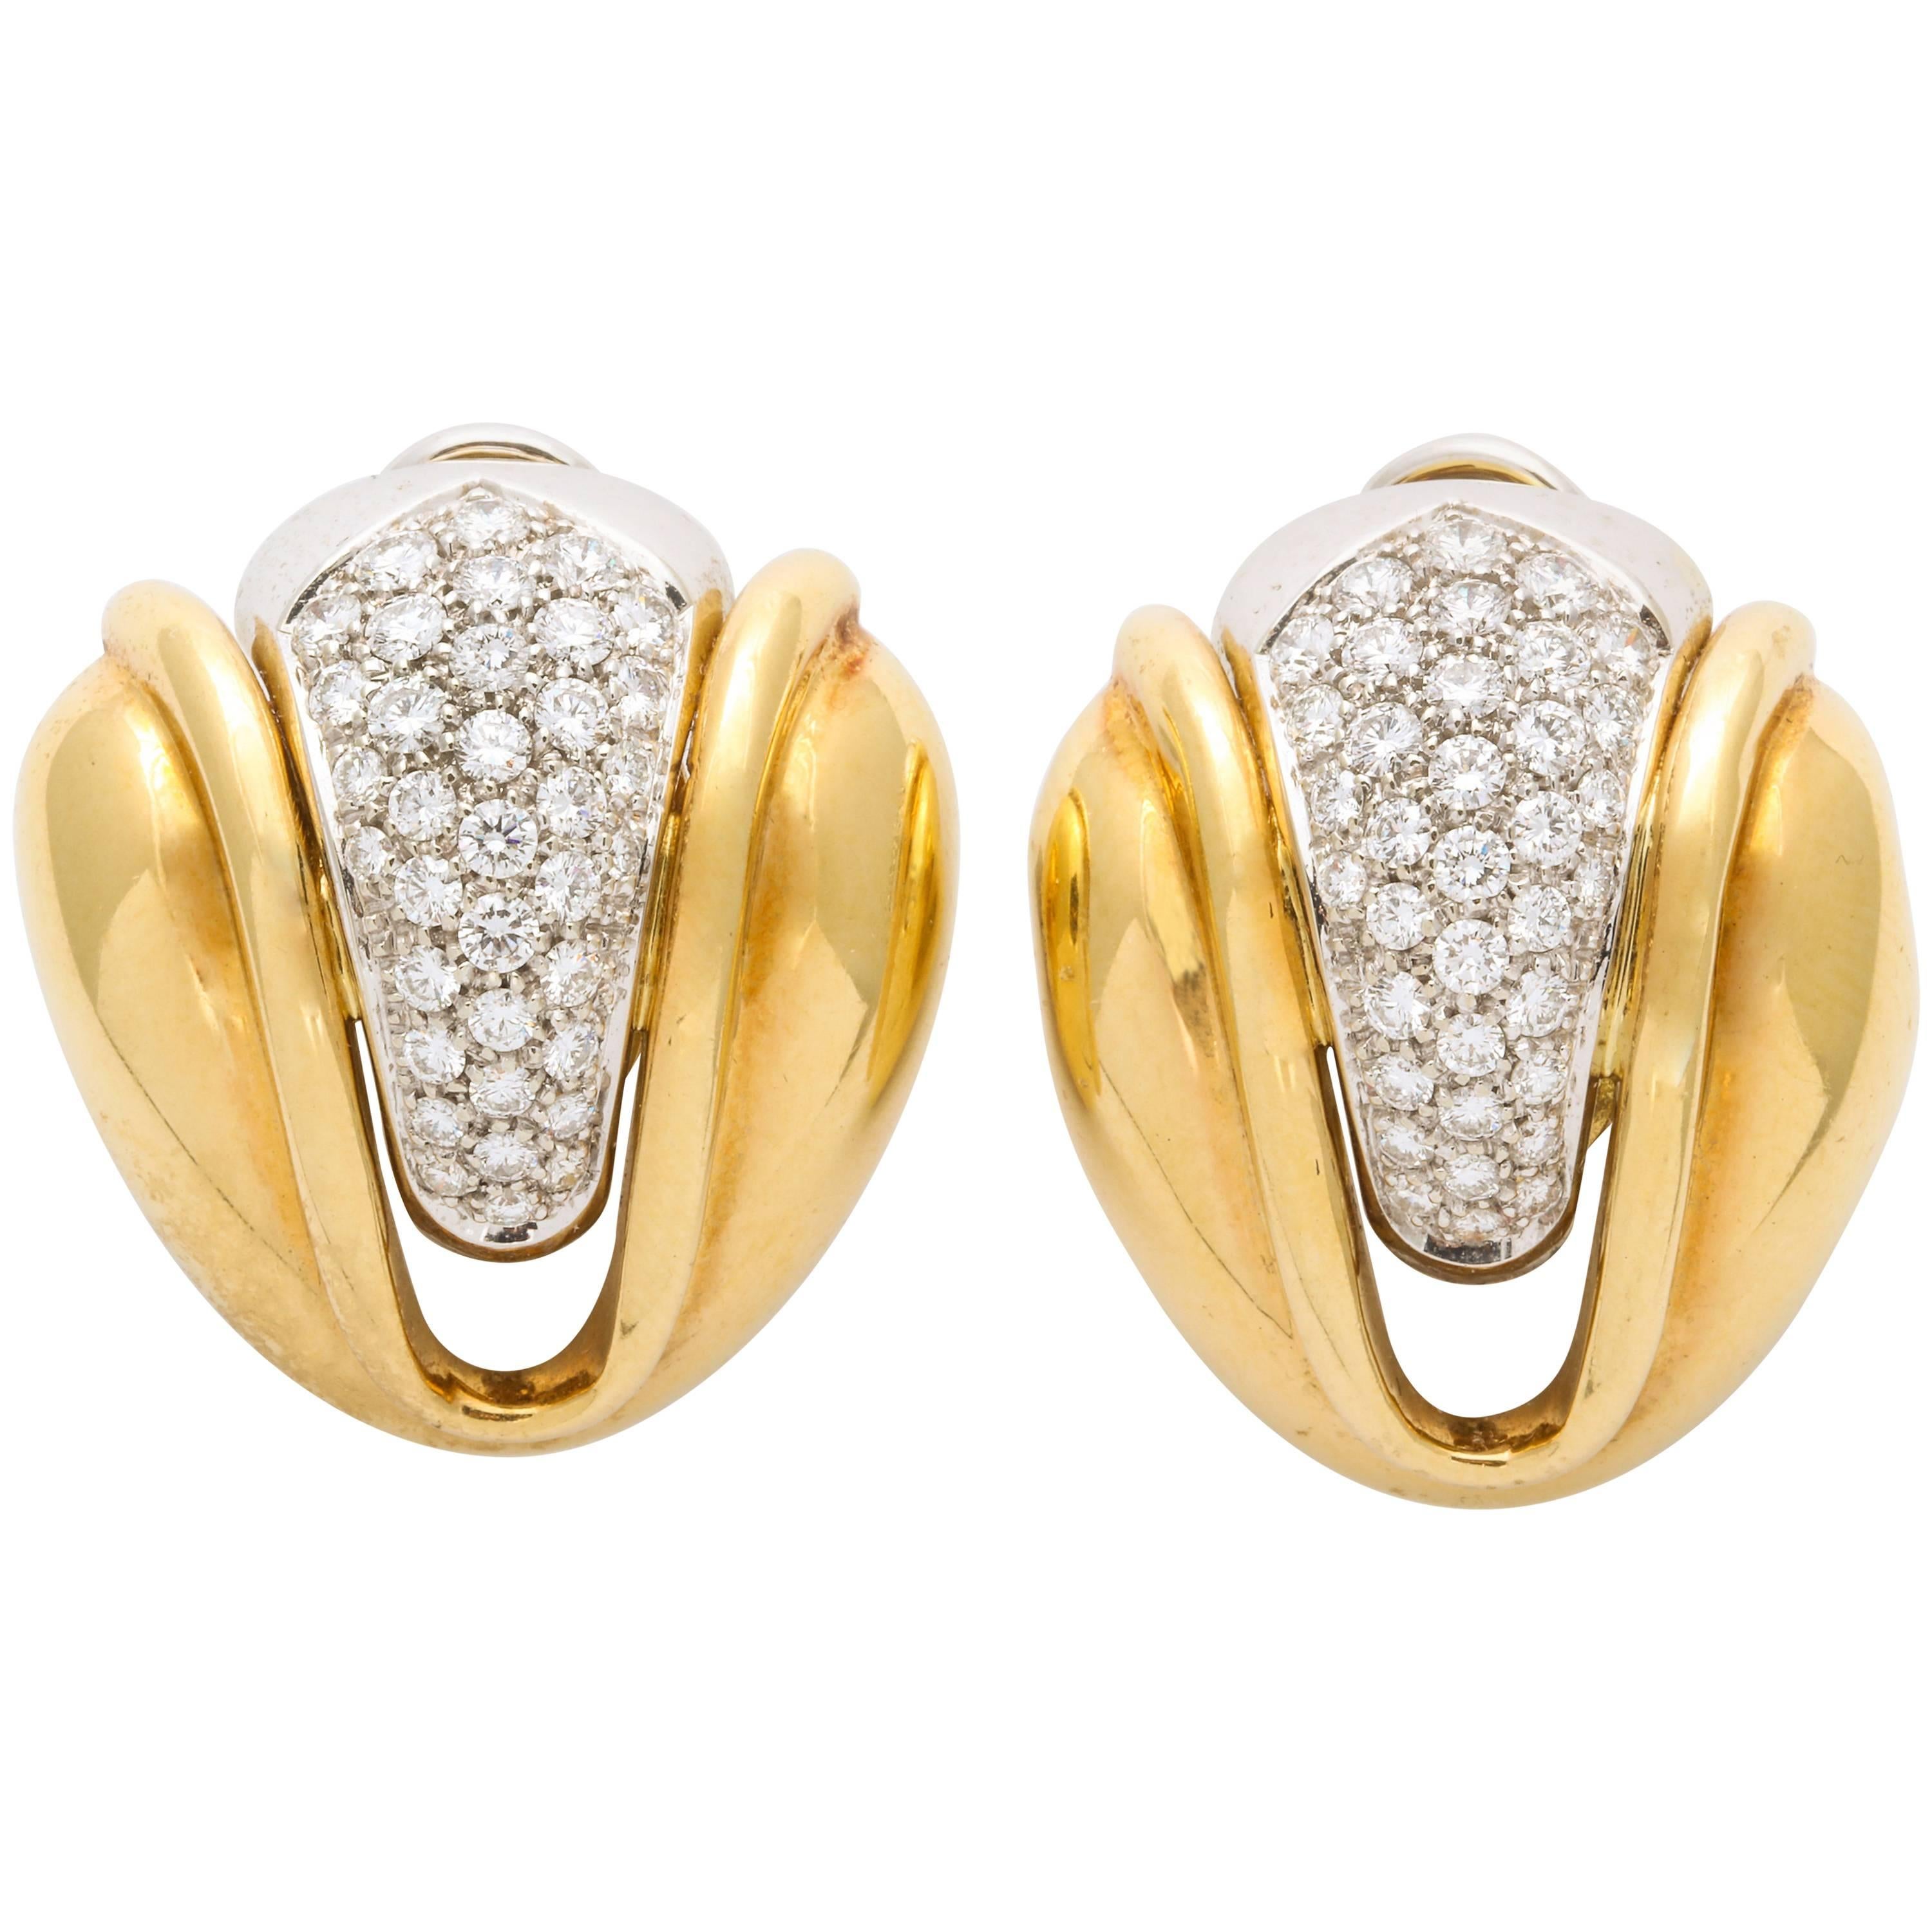  Diamond and Gold Petal Form clip Earrings For Sale